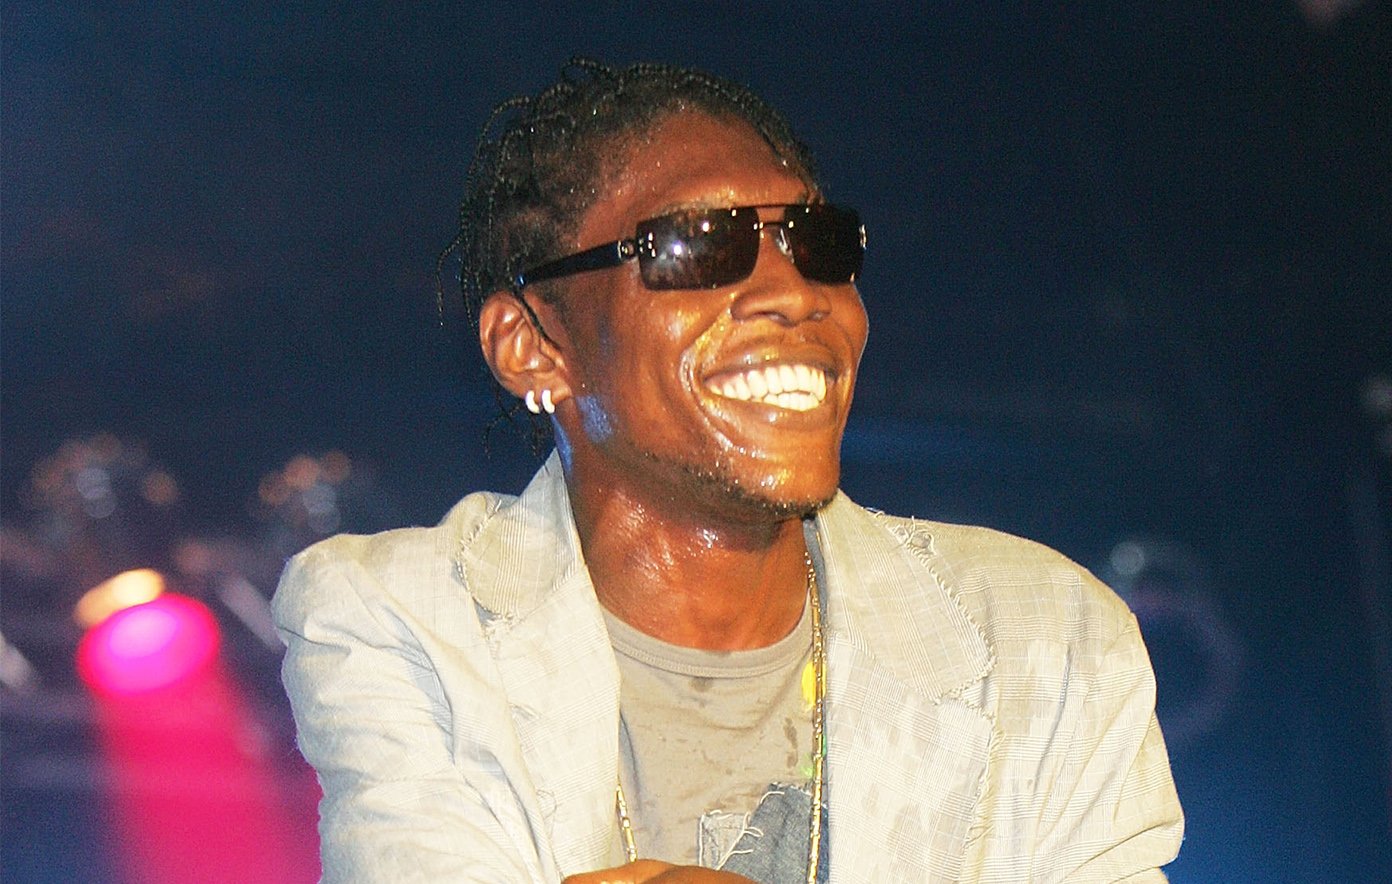 Jamaican dancehall legend Vybz Kartel freed from prison after 13 years behind bars